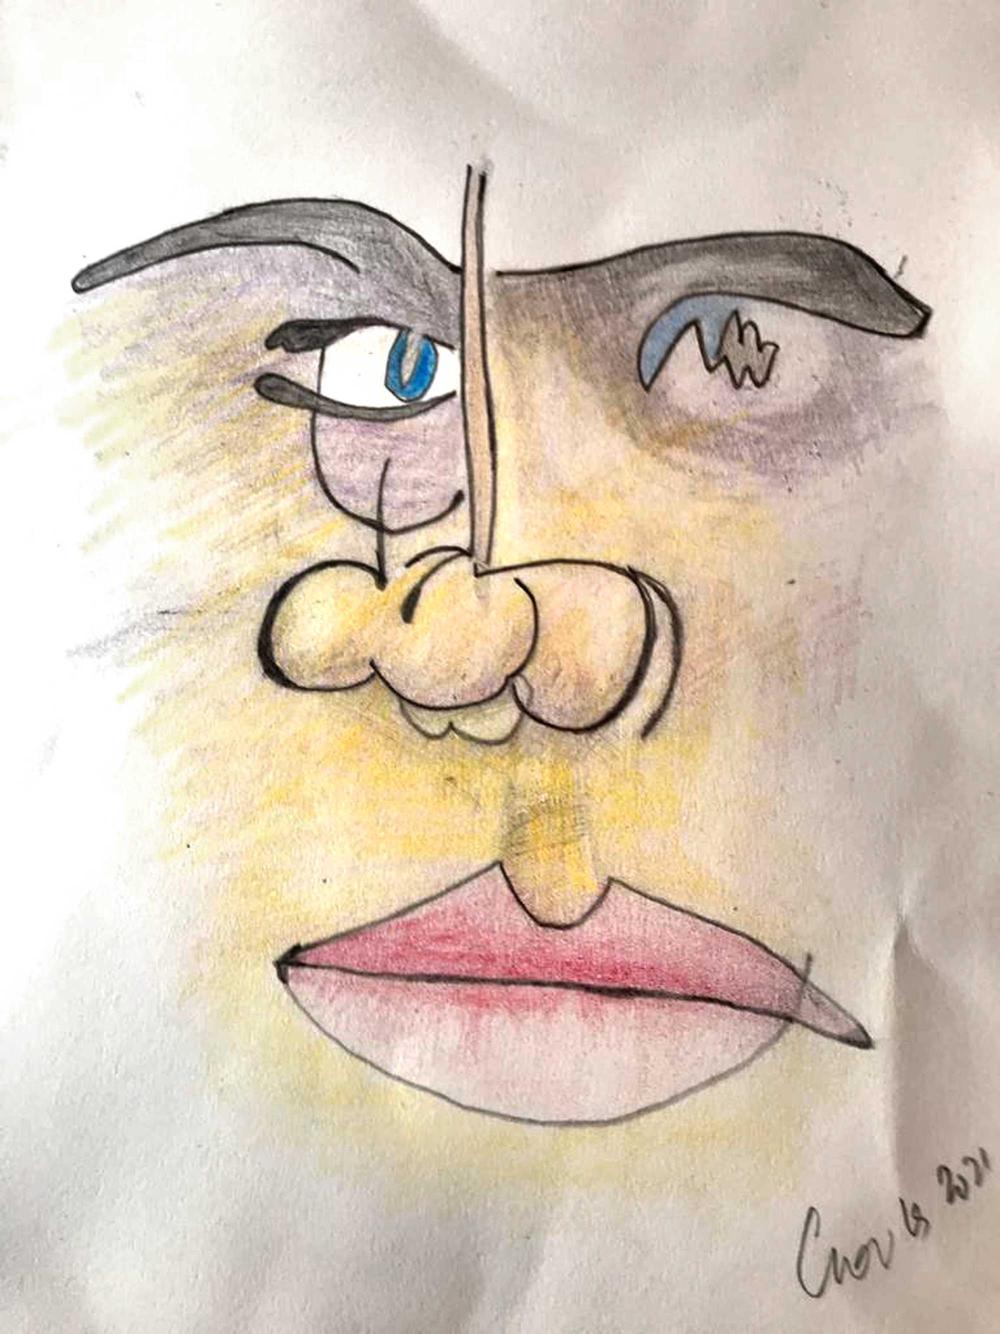 Black lines drawing of a human face executed blindfolded and added colours